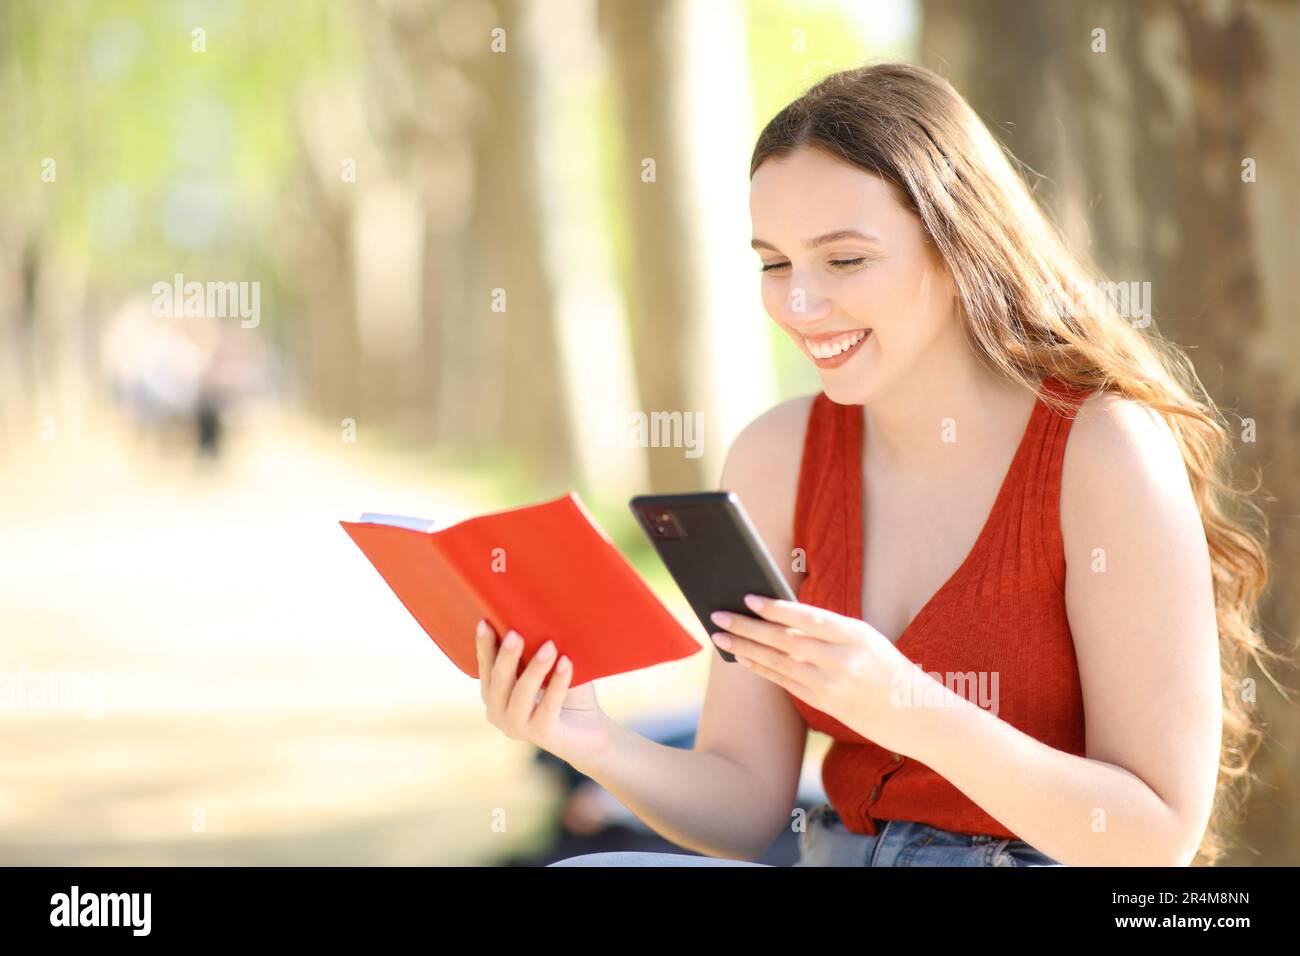 Happy woman checking paper agenda and phone in a park Stock Photo